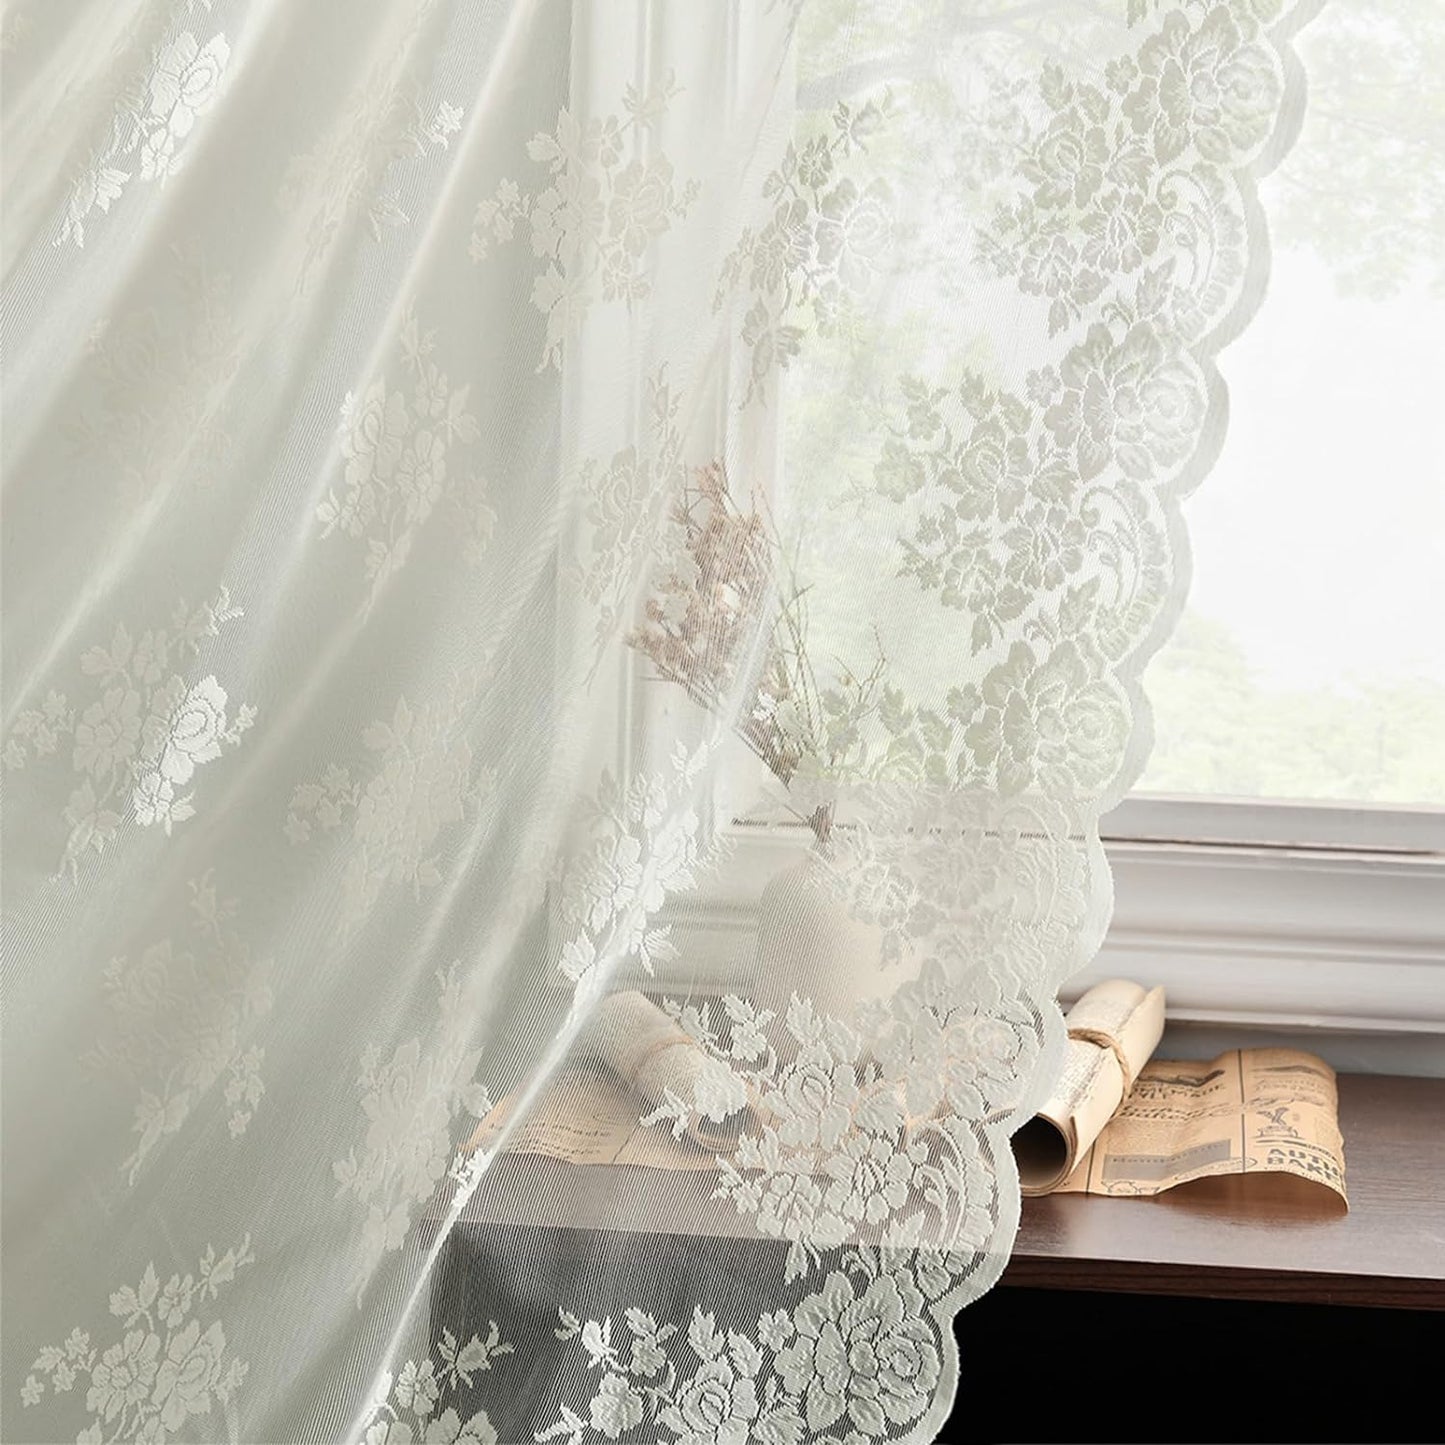 Kotile Sage Green Sheer Valance Curtain for Windows, Rustic Floral Spring Sheer Window Valance Curtain 18 Inch Length, Light Filtering Rod Pocket Lace Valance, 52 X 18 Inch, 1 Panel, Sage Green  Kotile Textile Ivory 52 In X 72 In (W X L) 